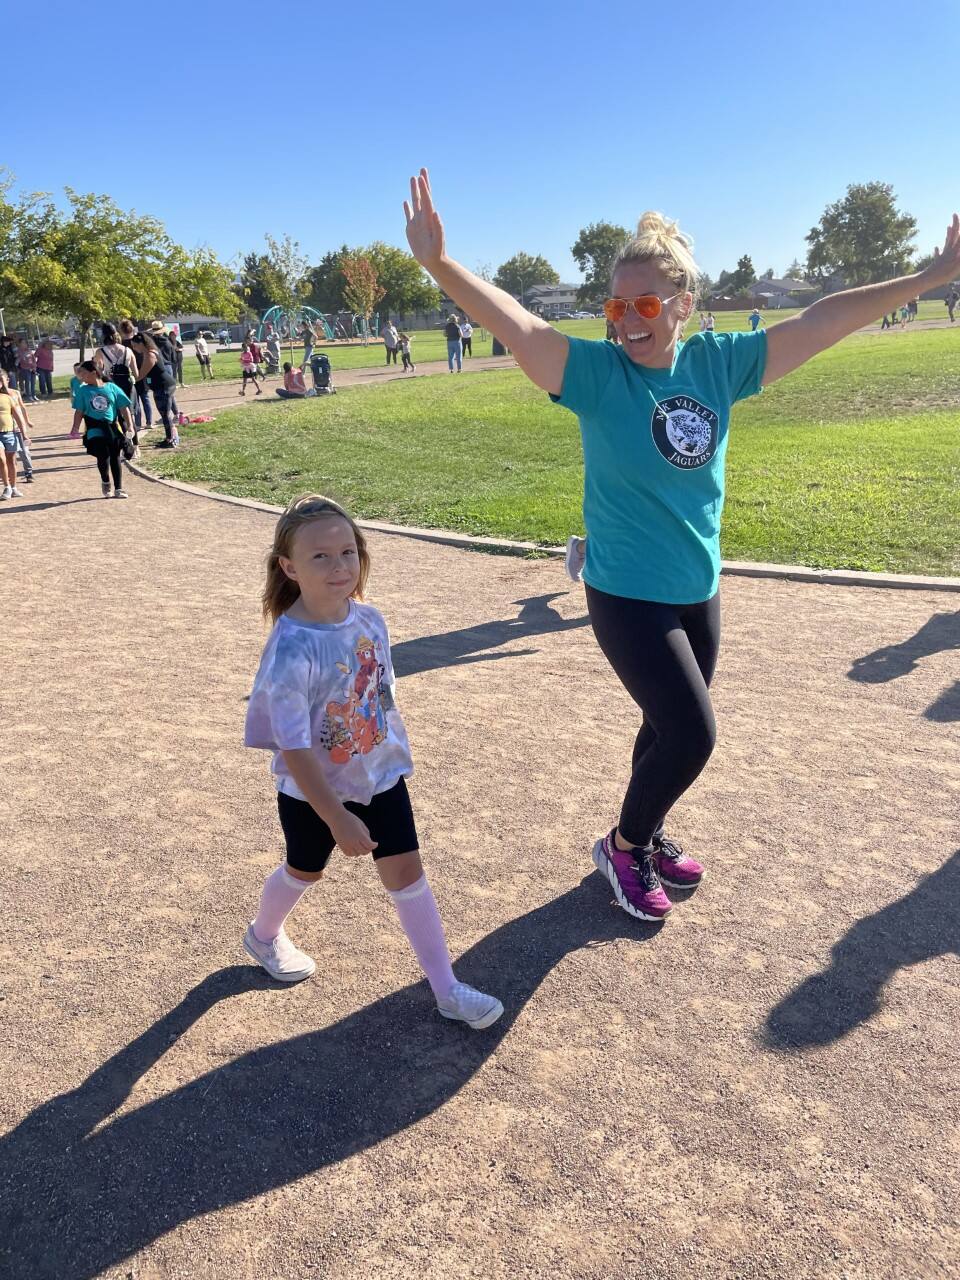 Then-Miwok Valley School Principal Mary Reynolds walks with a first grader in the school’s Lap-A-Thon. Reynolds has been appointed assistant principal at Petaluma High School. (PHOTO COURTESY KERR FRIBERG AND MICHELE GOCHBURG)